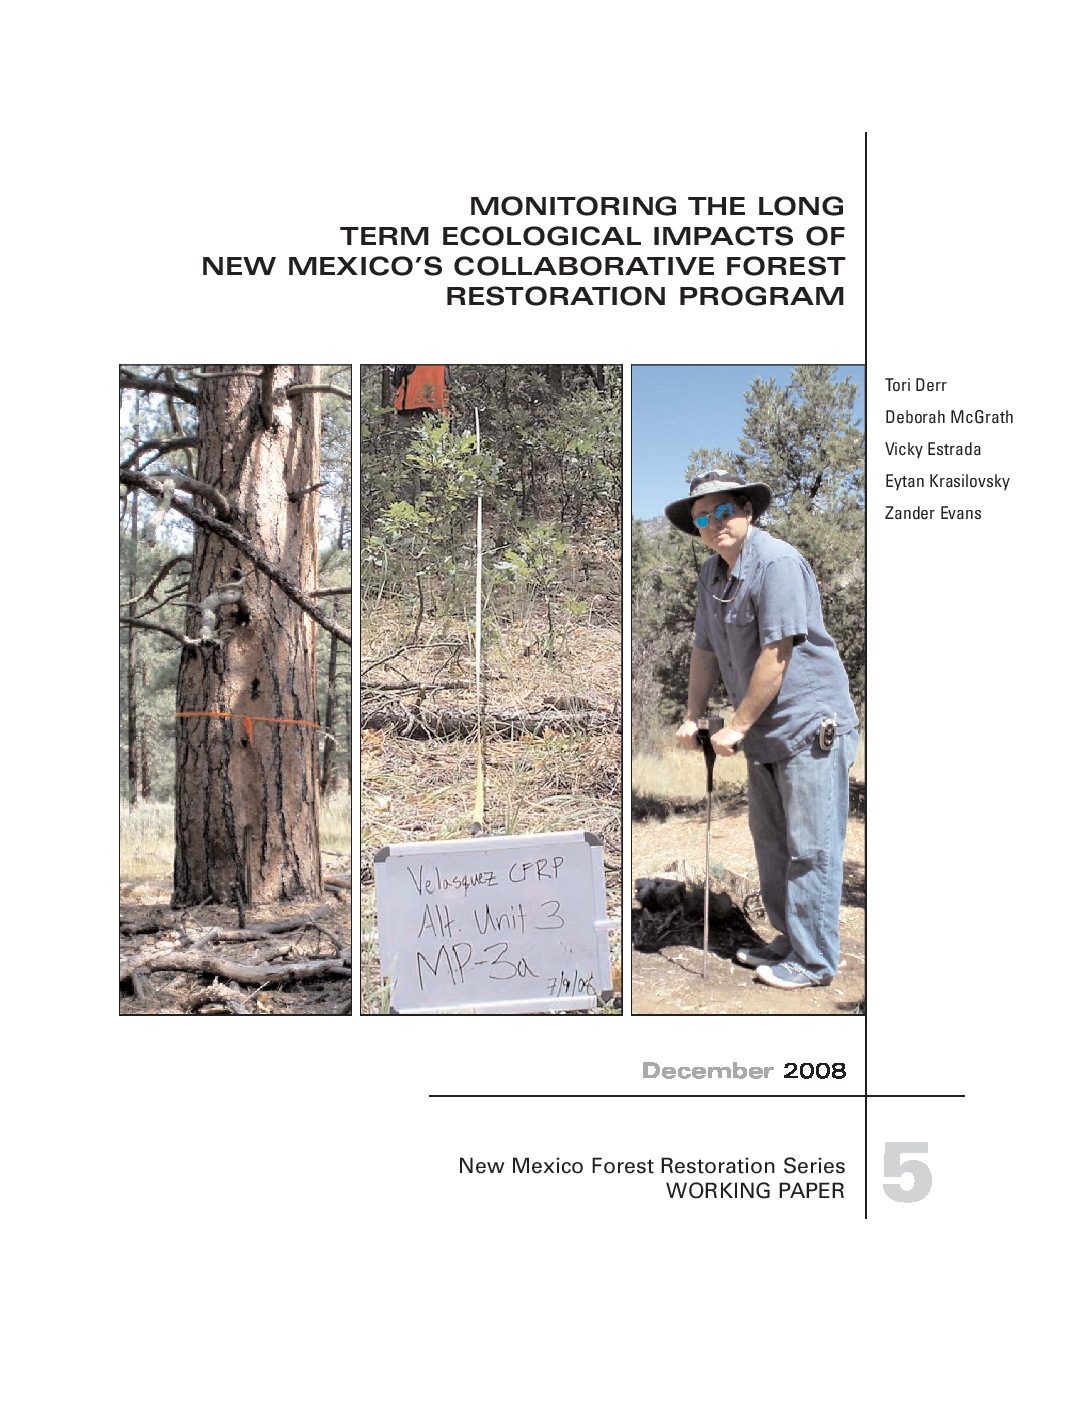 Monitoring The Long Term Ecological Impacts Of New Mexico’s Collaborative Forest Restoration Program